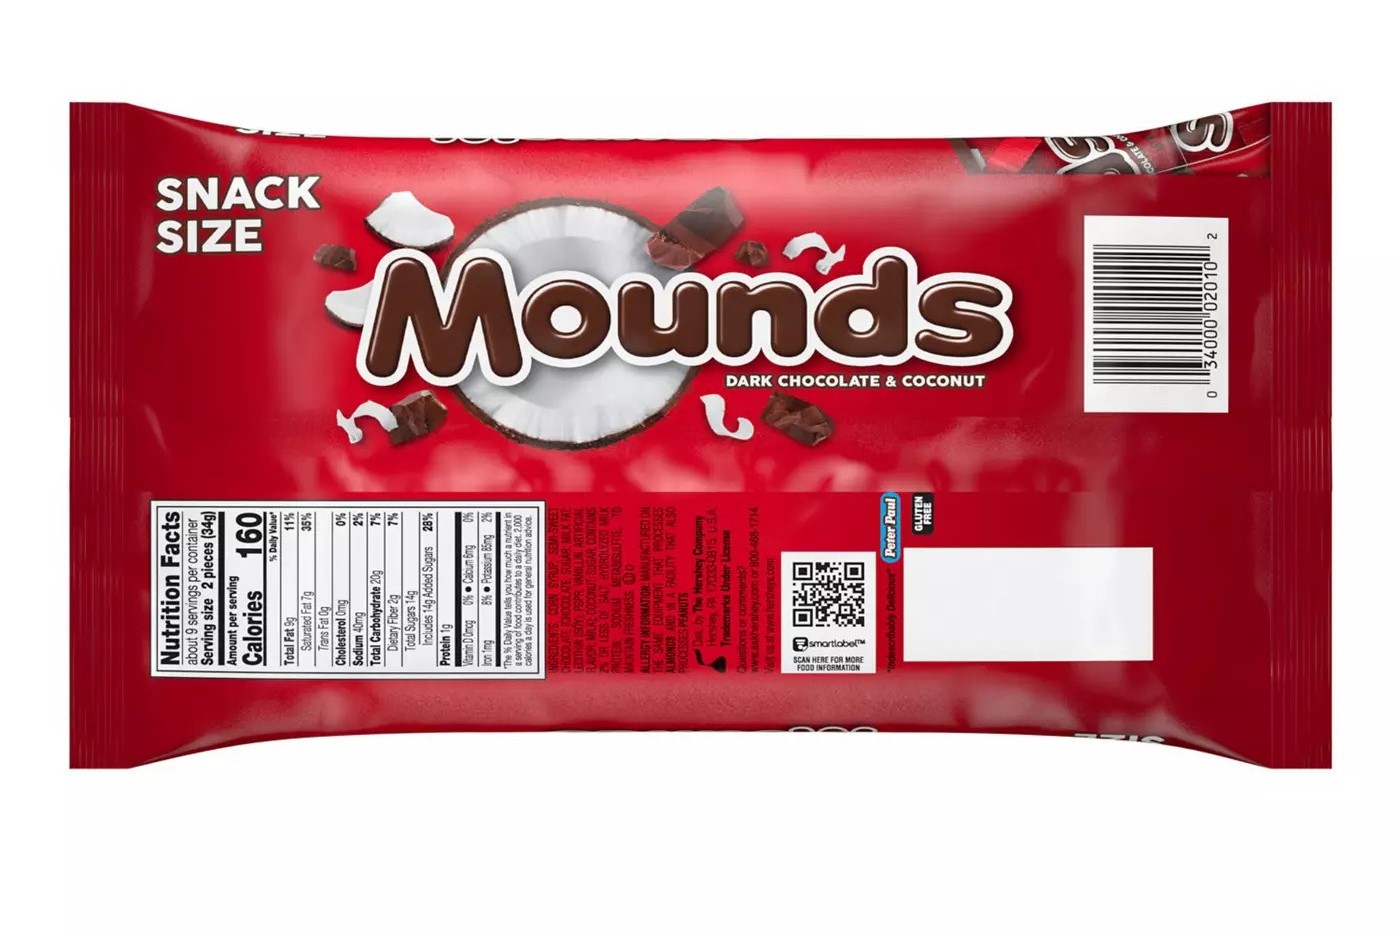 19-mounds-nutrition-facts